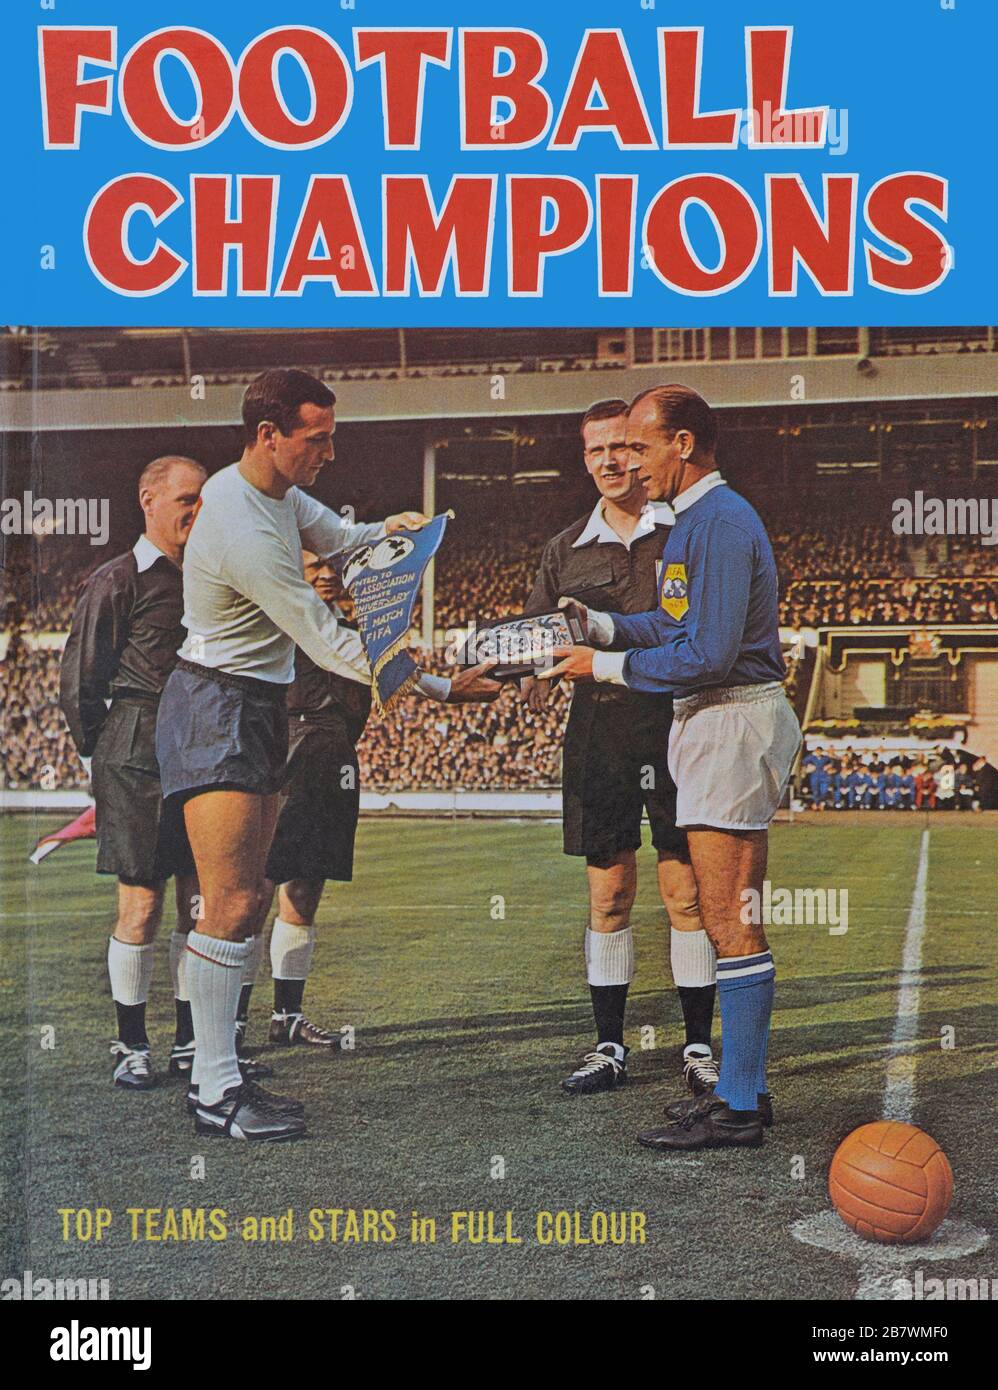 1963 England v Rest of the World football match front cover photo on the Football Champions annual 1963-64 Stock Photo